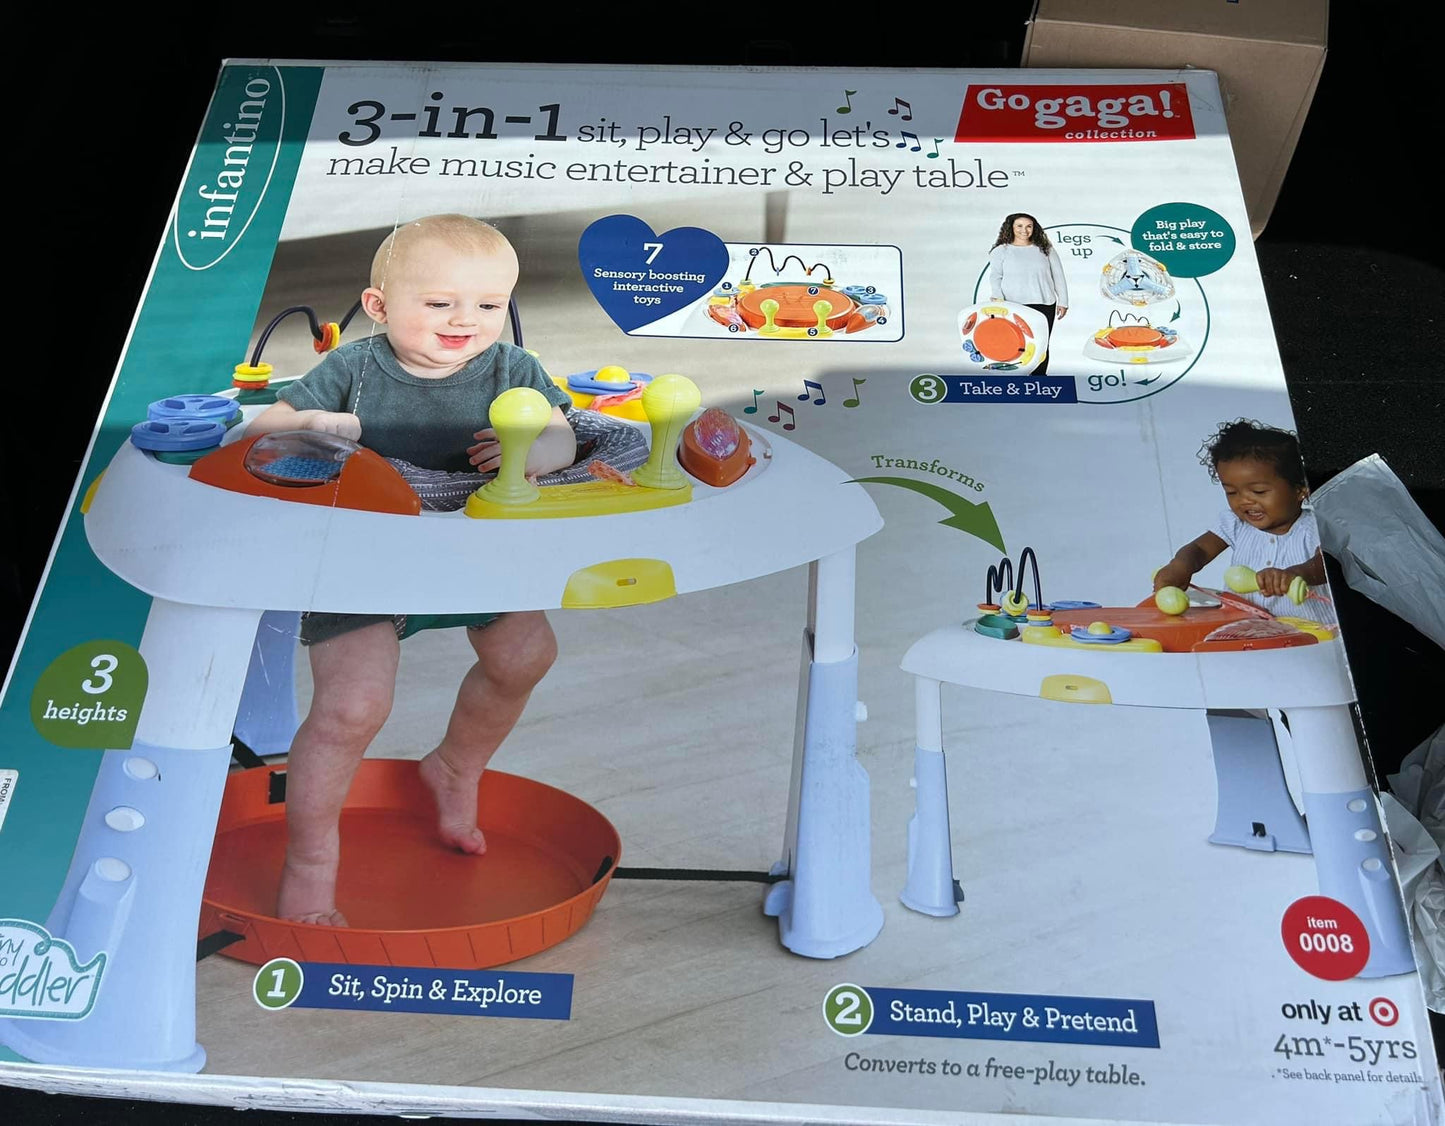 PPU ONLY (45039) 3-in-1 Bouncer/Play Center. Brand new in box